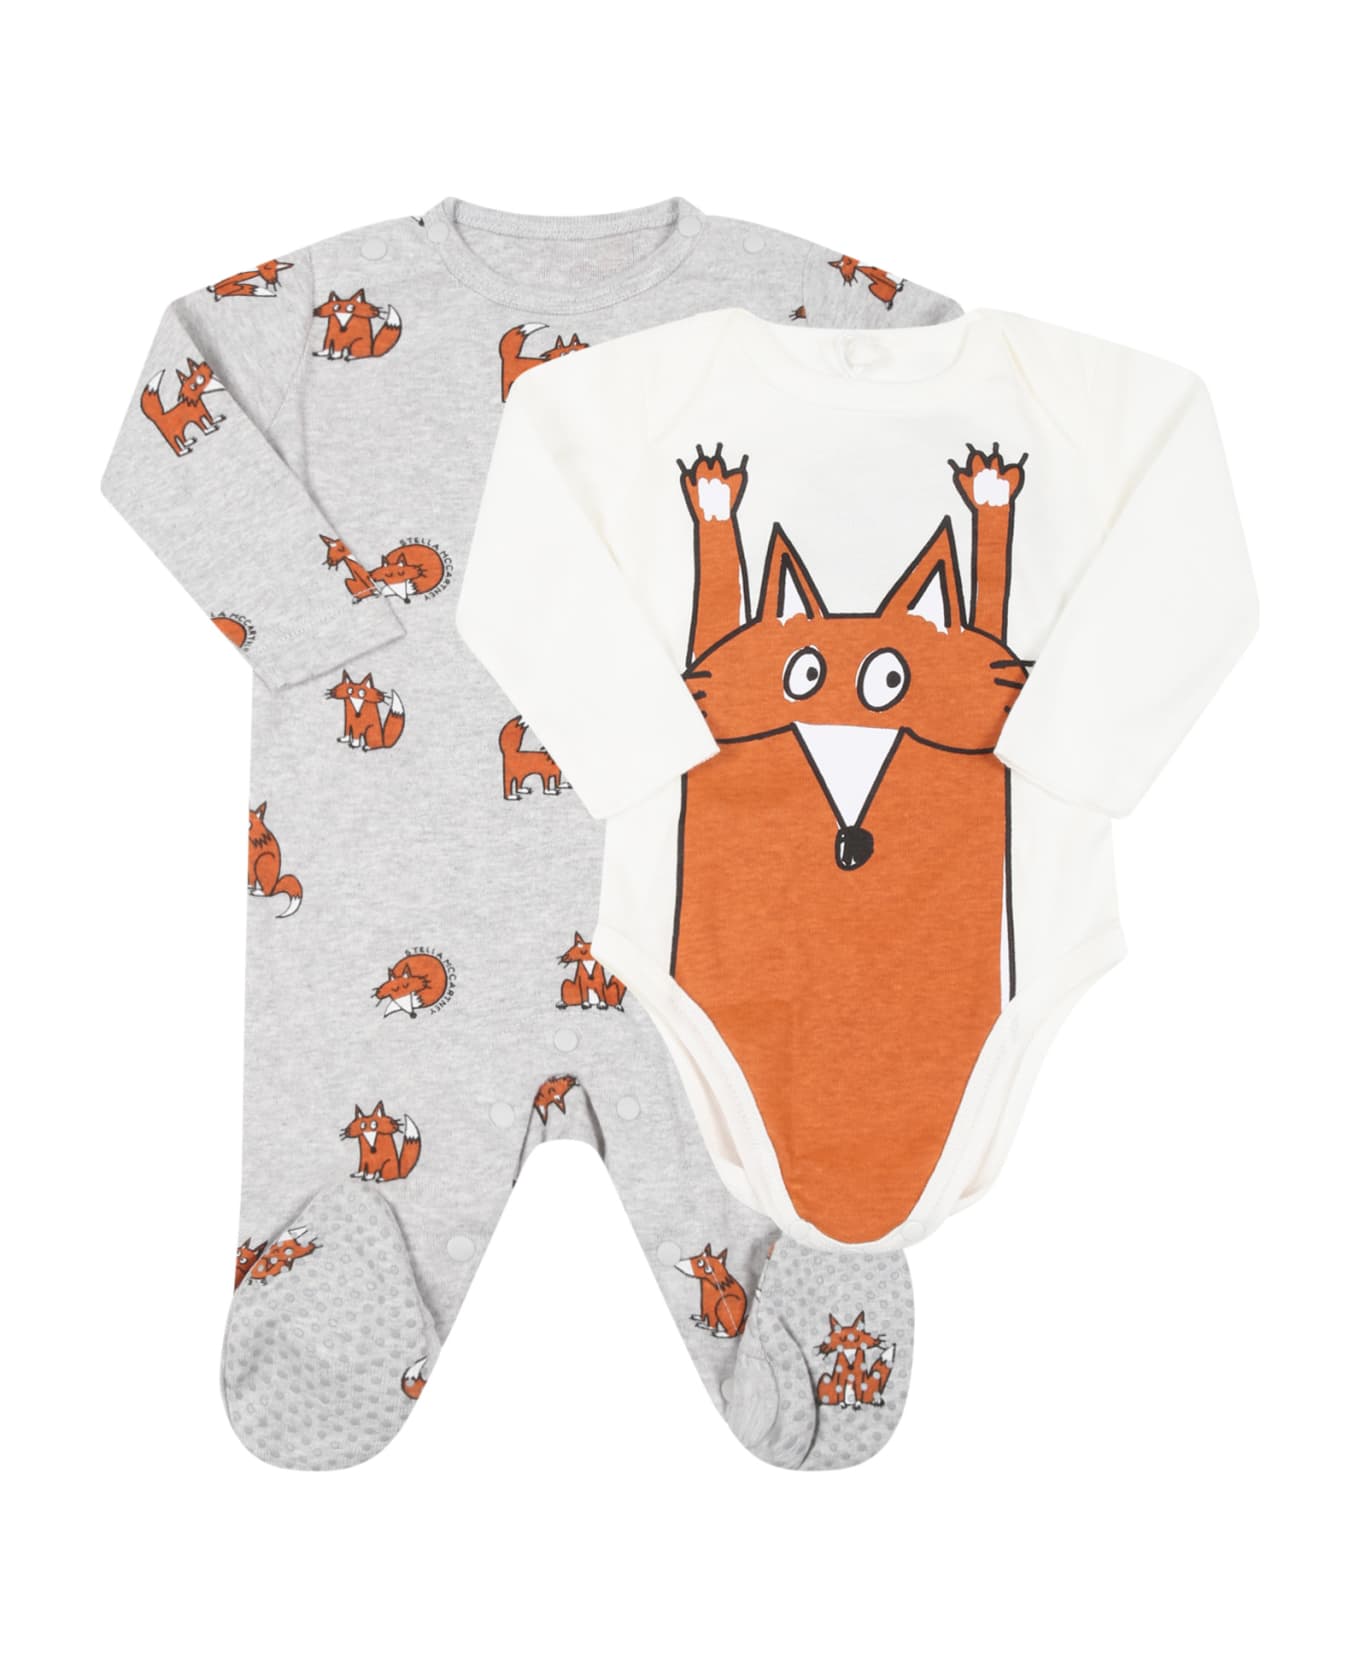 Stella McCartney Kids Multicolor Set For Baby Boy With Foxes | italist,  ALWAYS LIKE A SALE